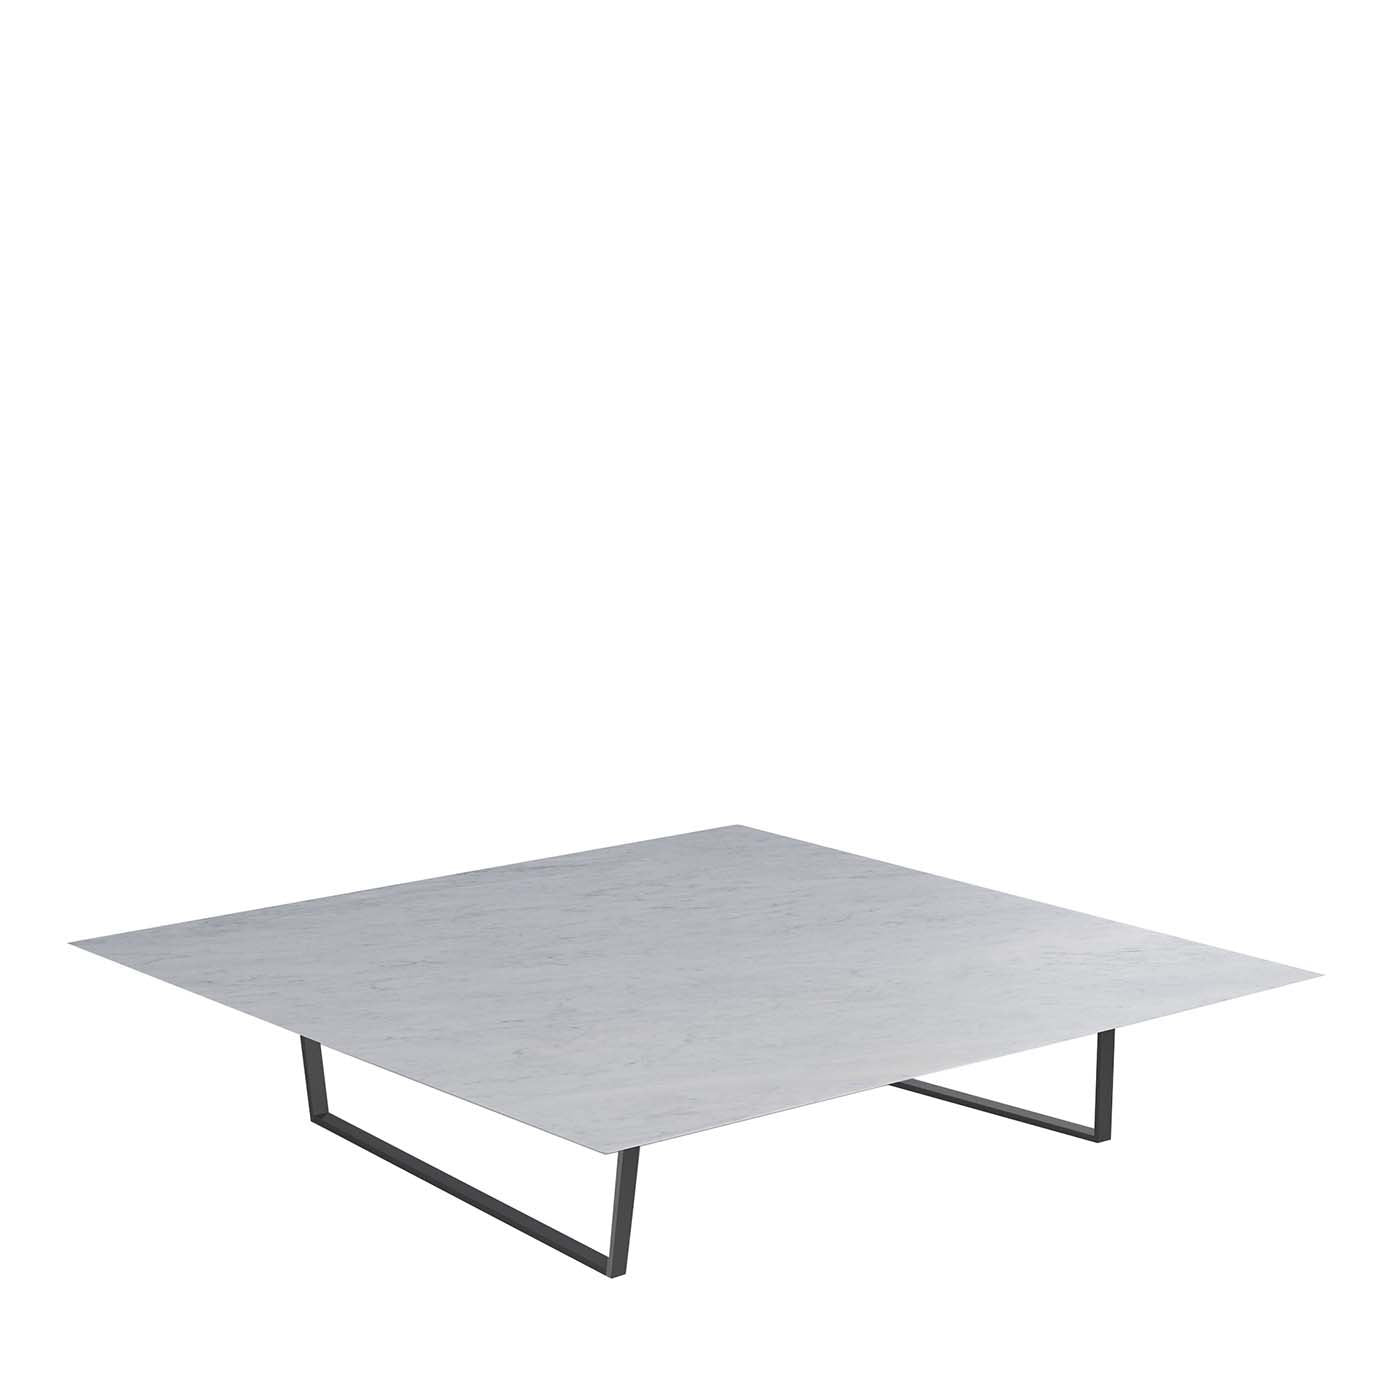 Large Square Dritto Coffee Table by Piero Lissoni - Main view